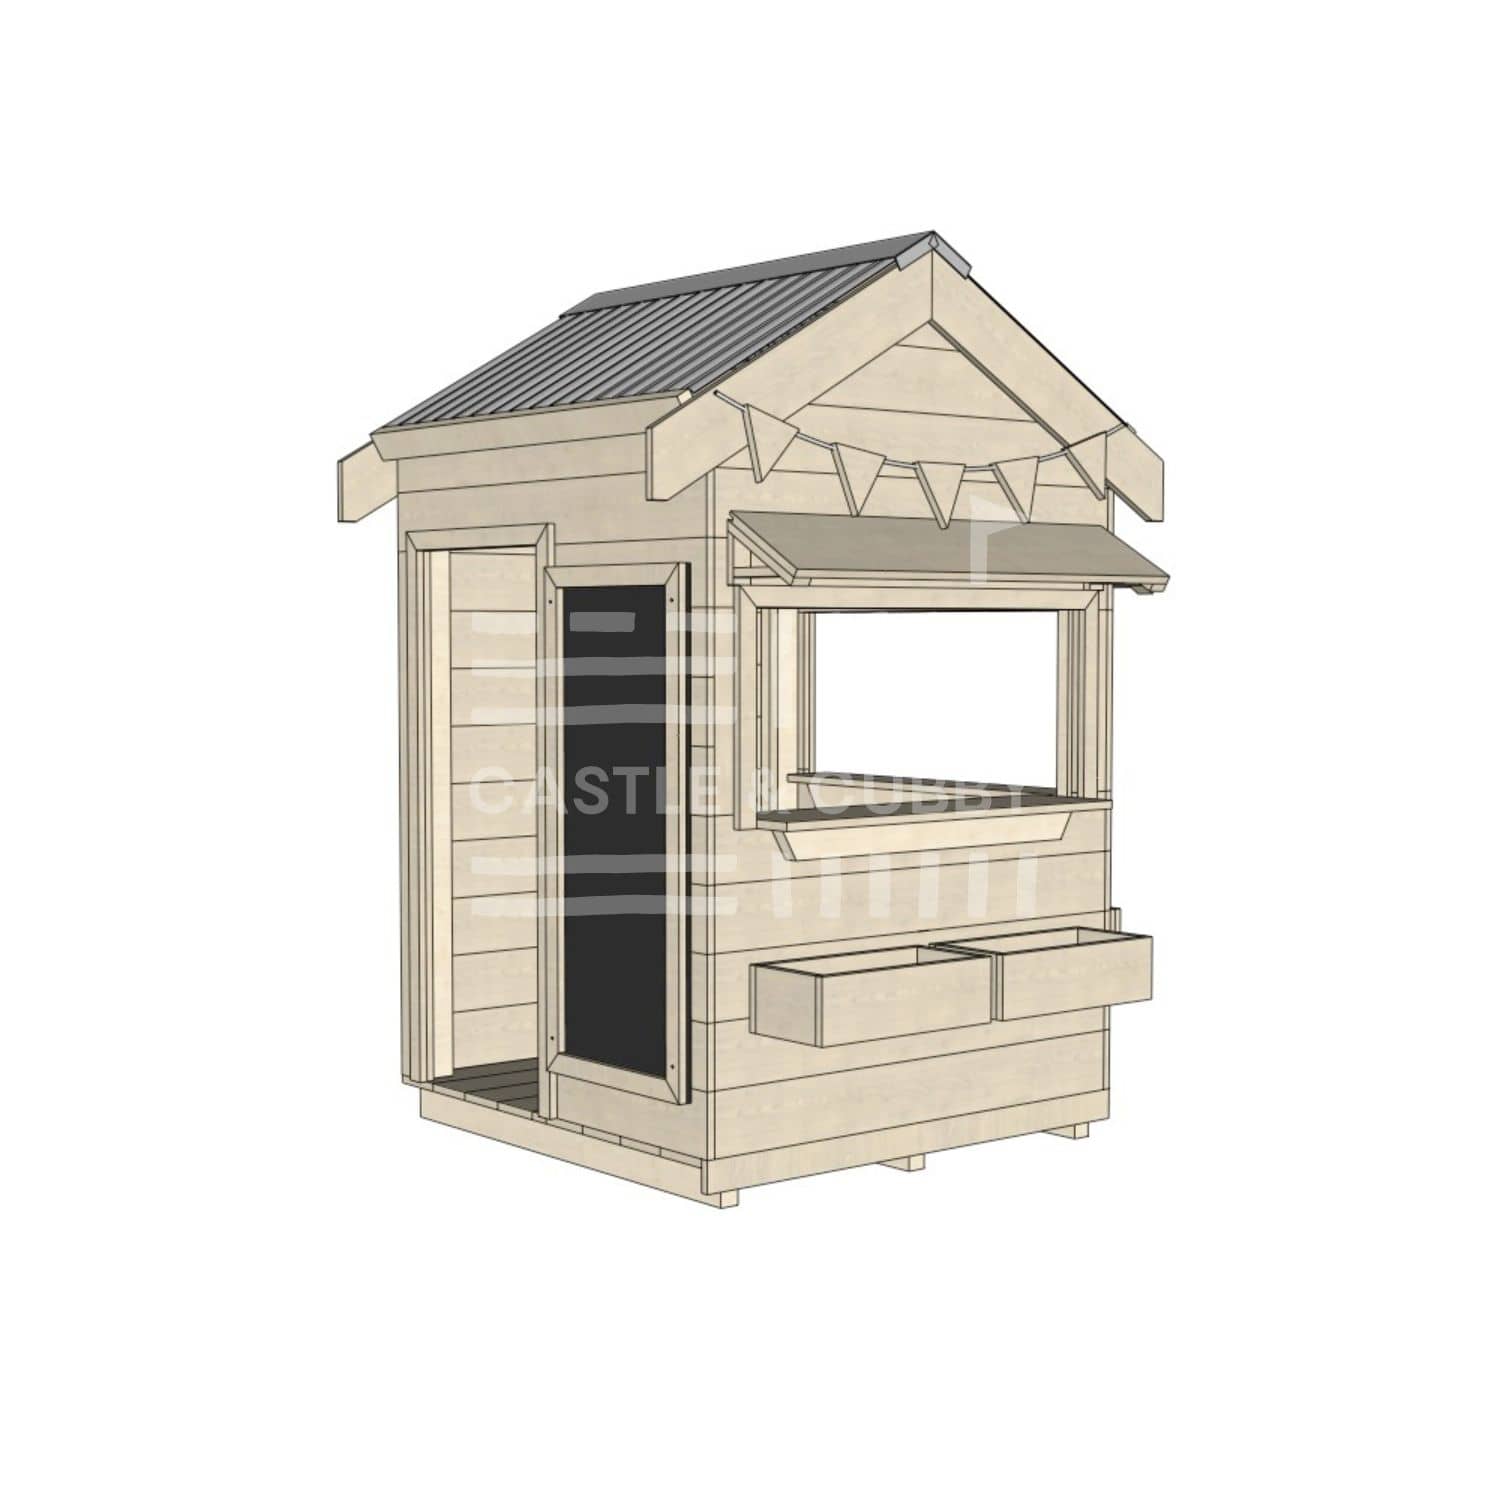 Pitched roof raw wooden cubby house commercial education little square accessories